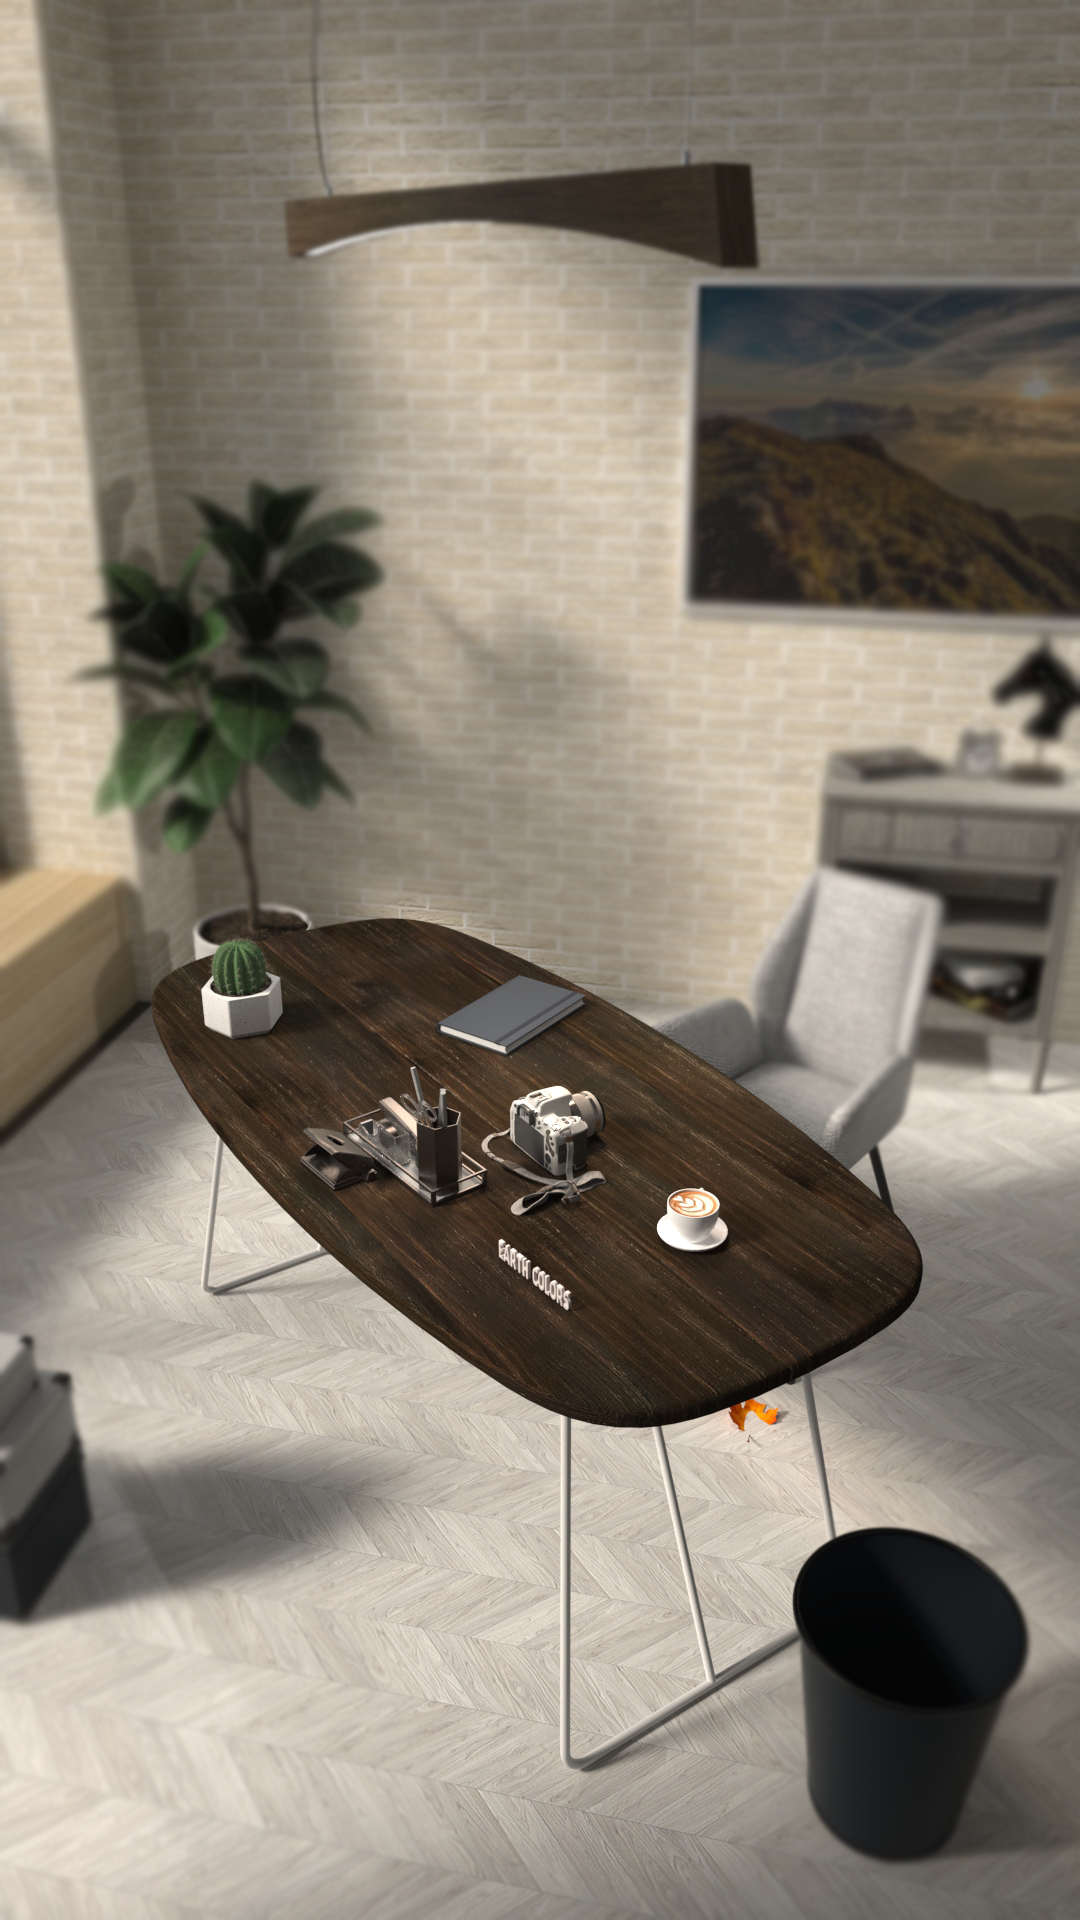 If you find Table for offices fit your style get them at EARTHCOLORS